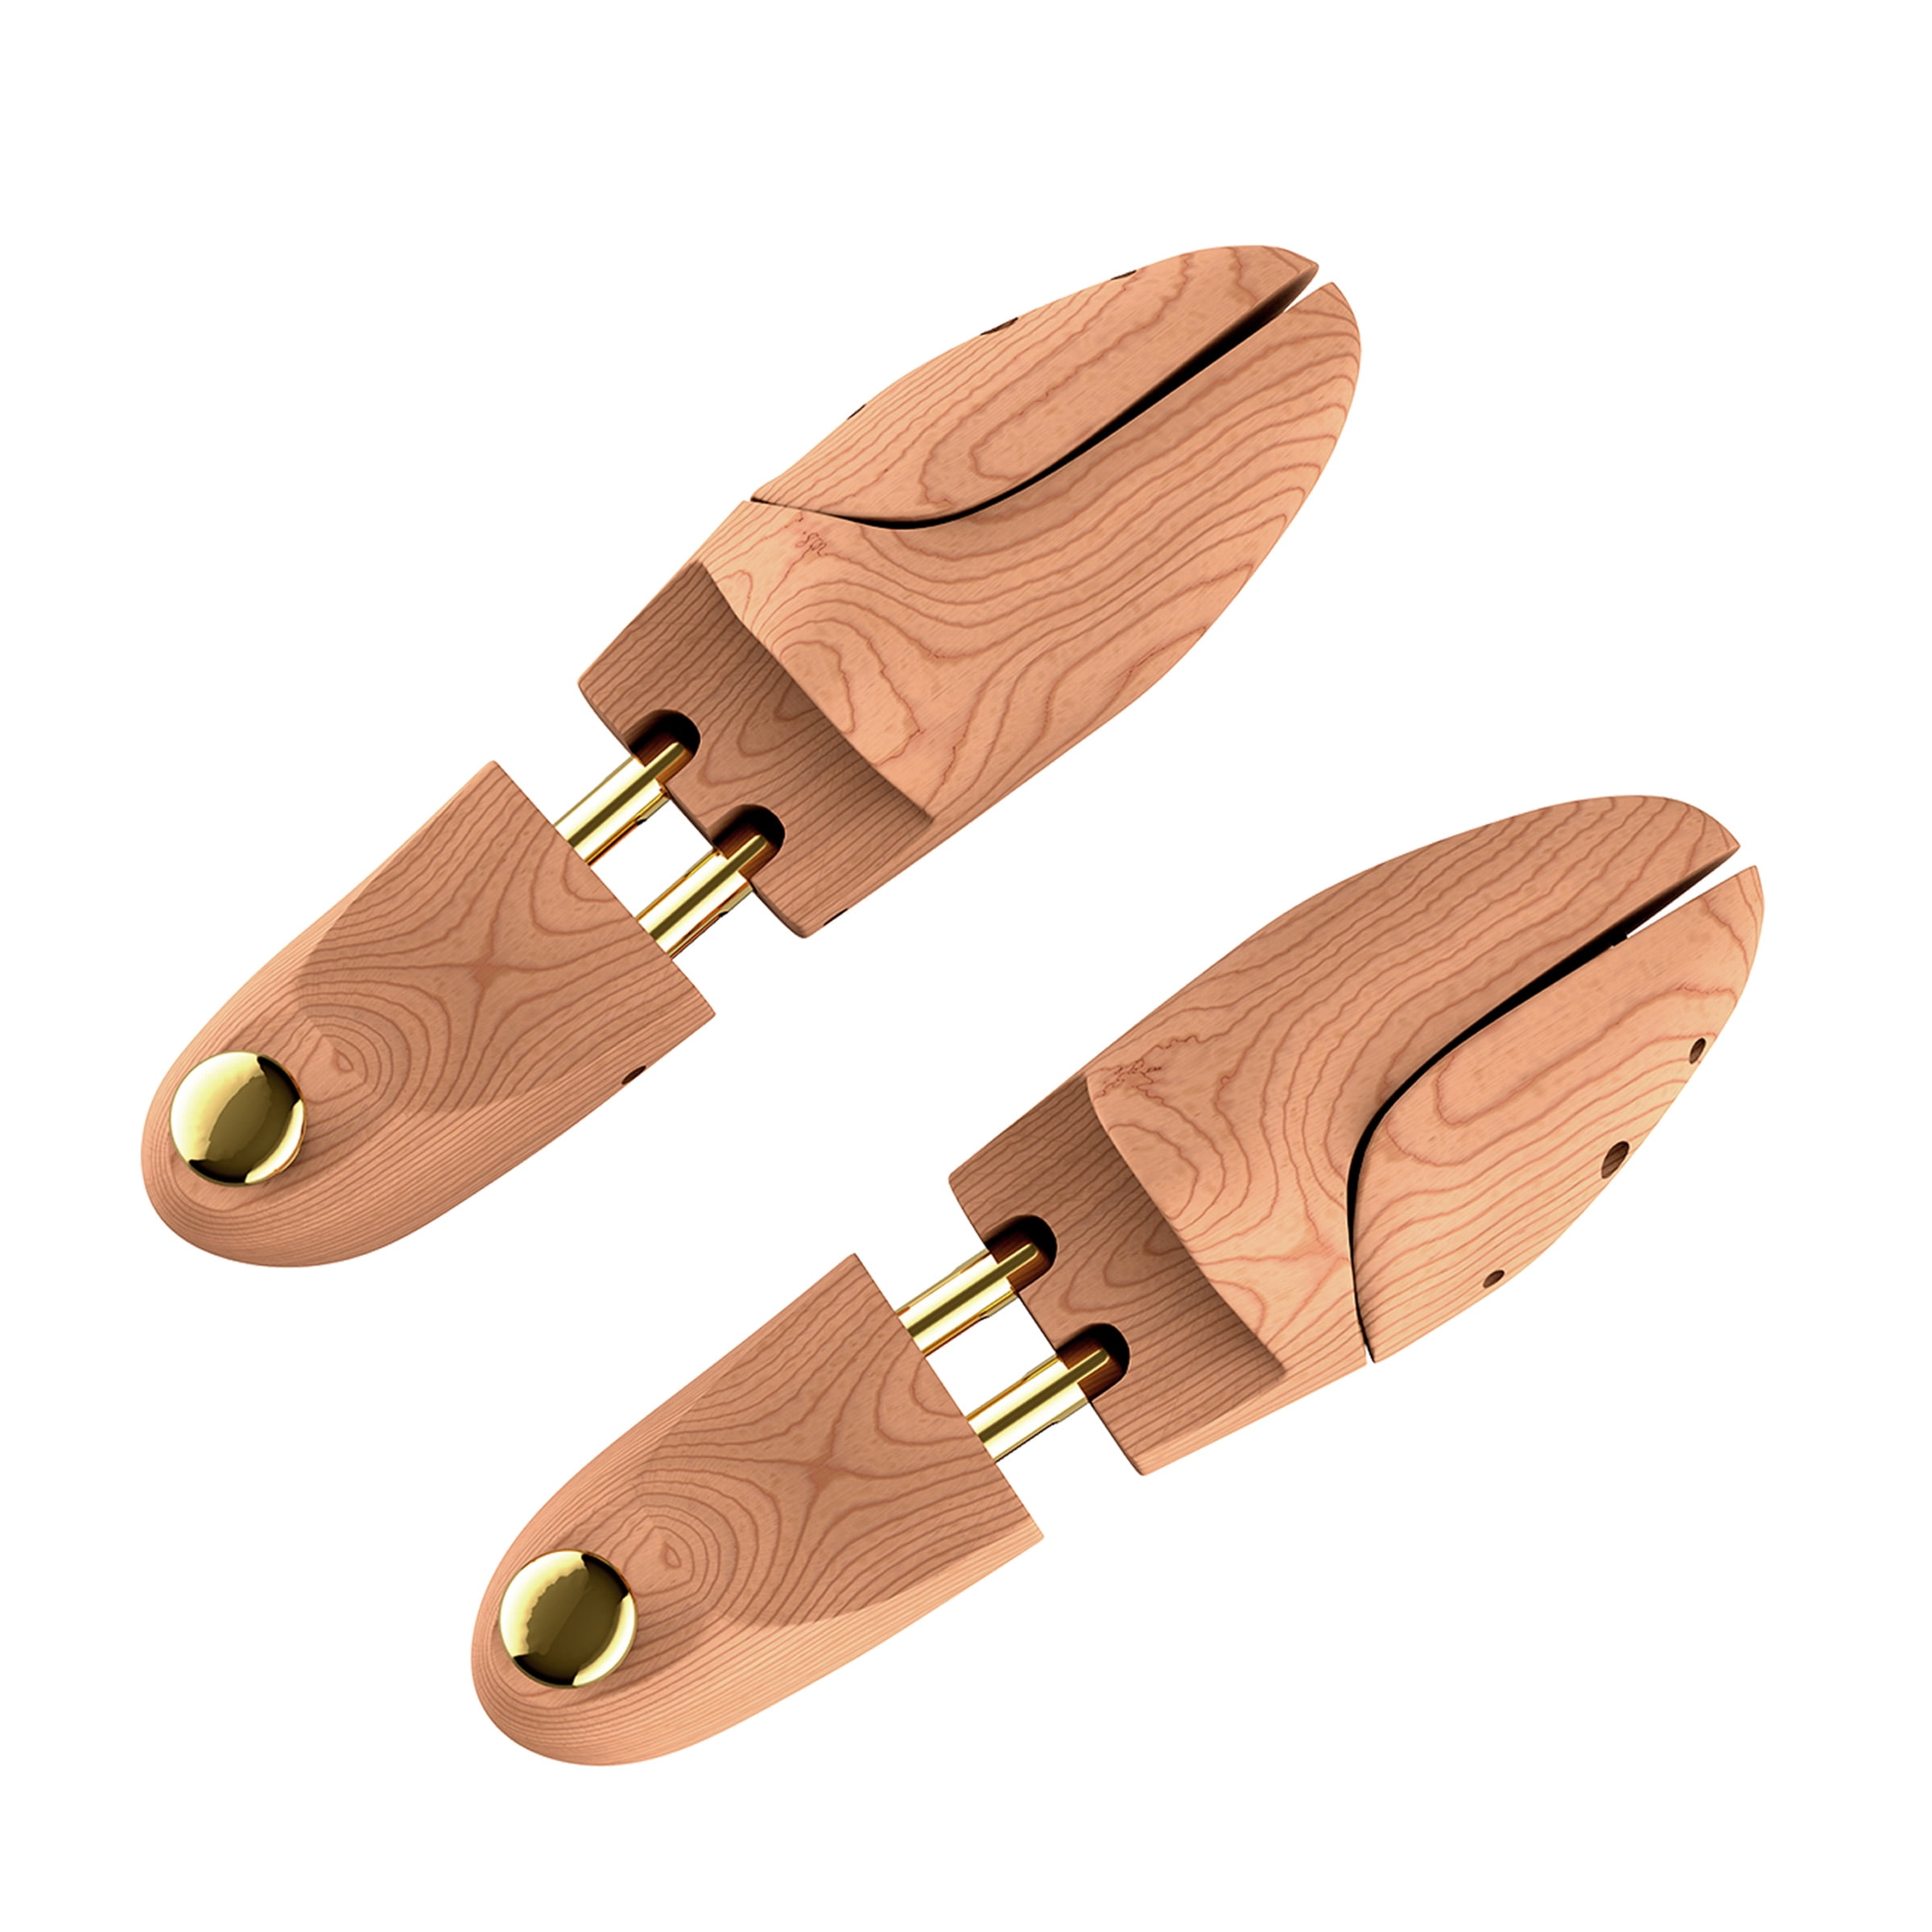 3 Pairs of Size 9/10.5 43/45 Mens Womens Wooden Shoe Trees Stretchers Shapers